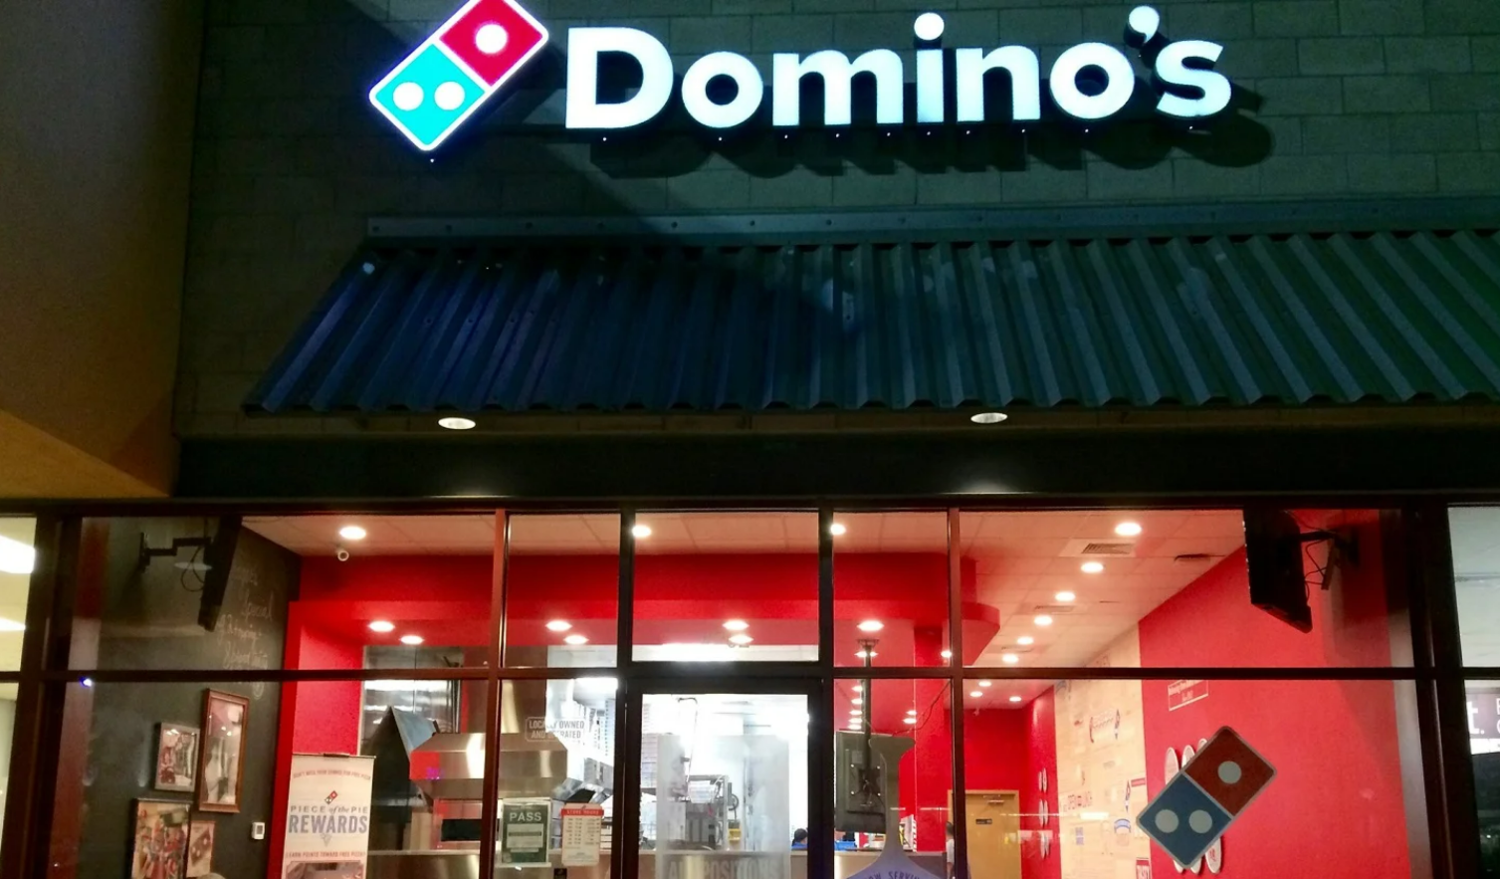 swot analysis of dominos pizza-franchise